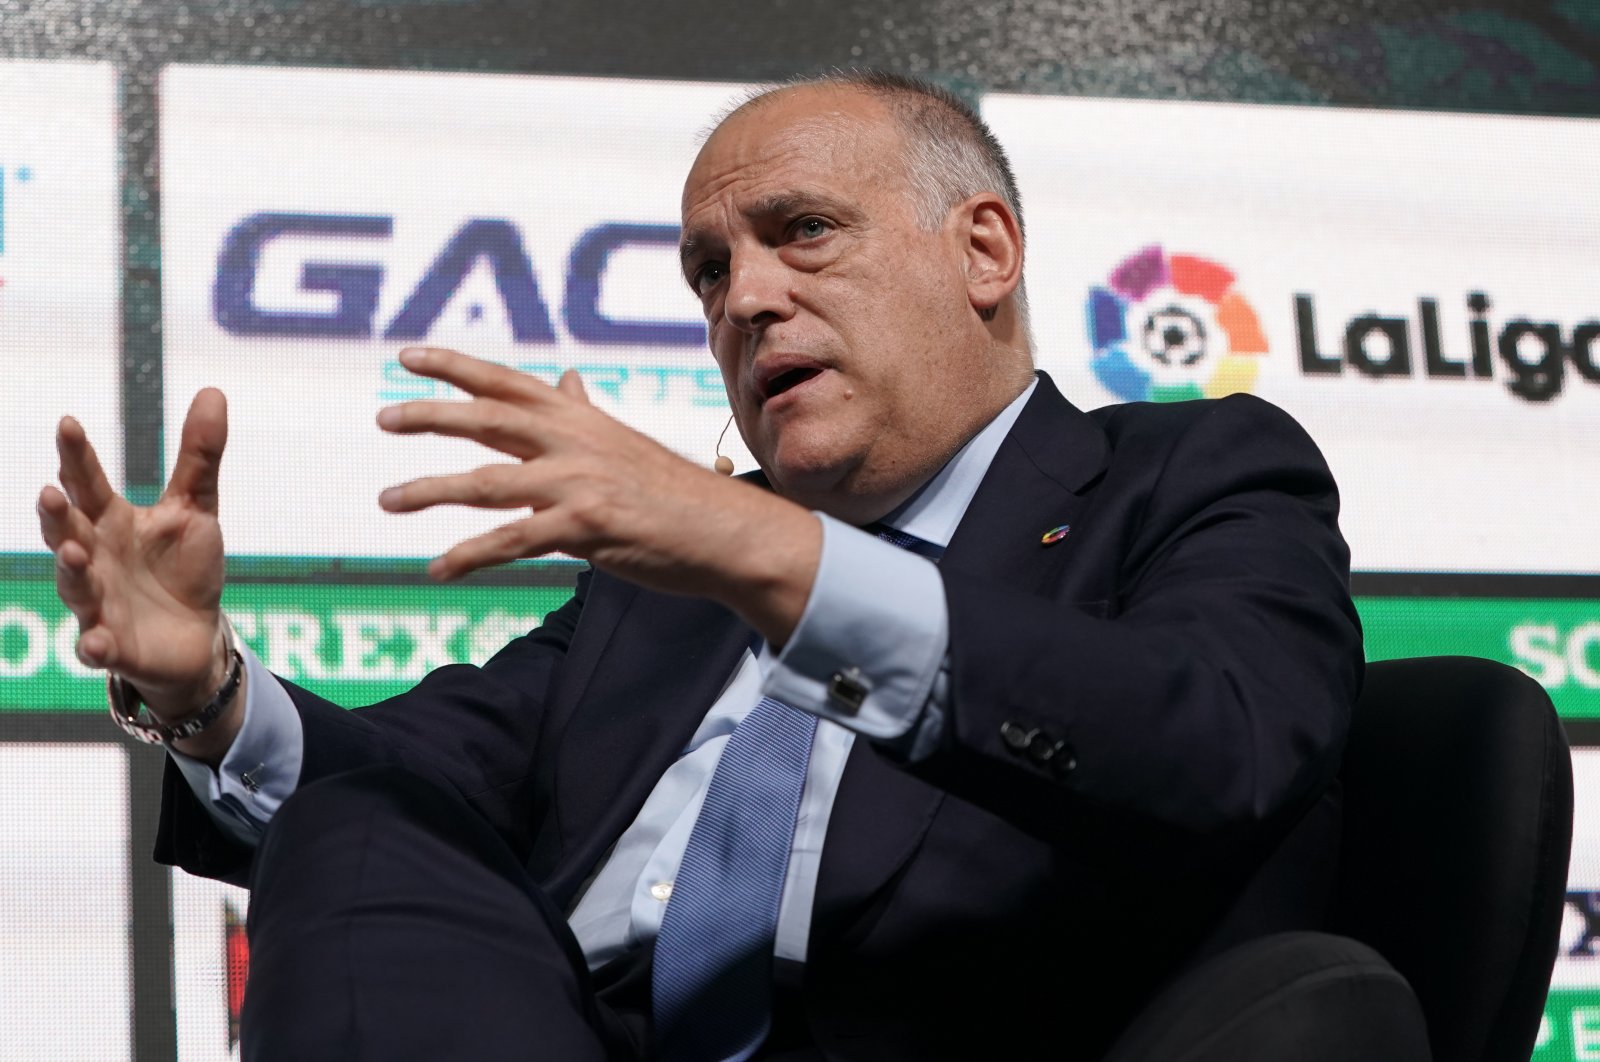 La Liga President Javier Tebas speaks during Day 1 of the Soccerex Europe Convention at Tagus Park, Lisbon, Portugal, Sept. 5, 2019. (Getty Images Photo)